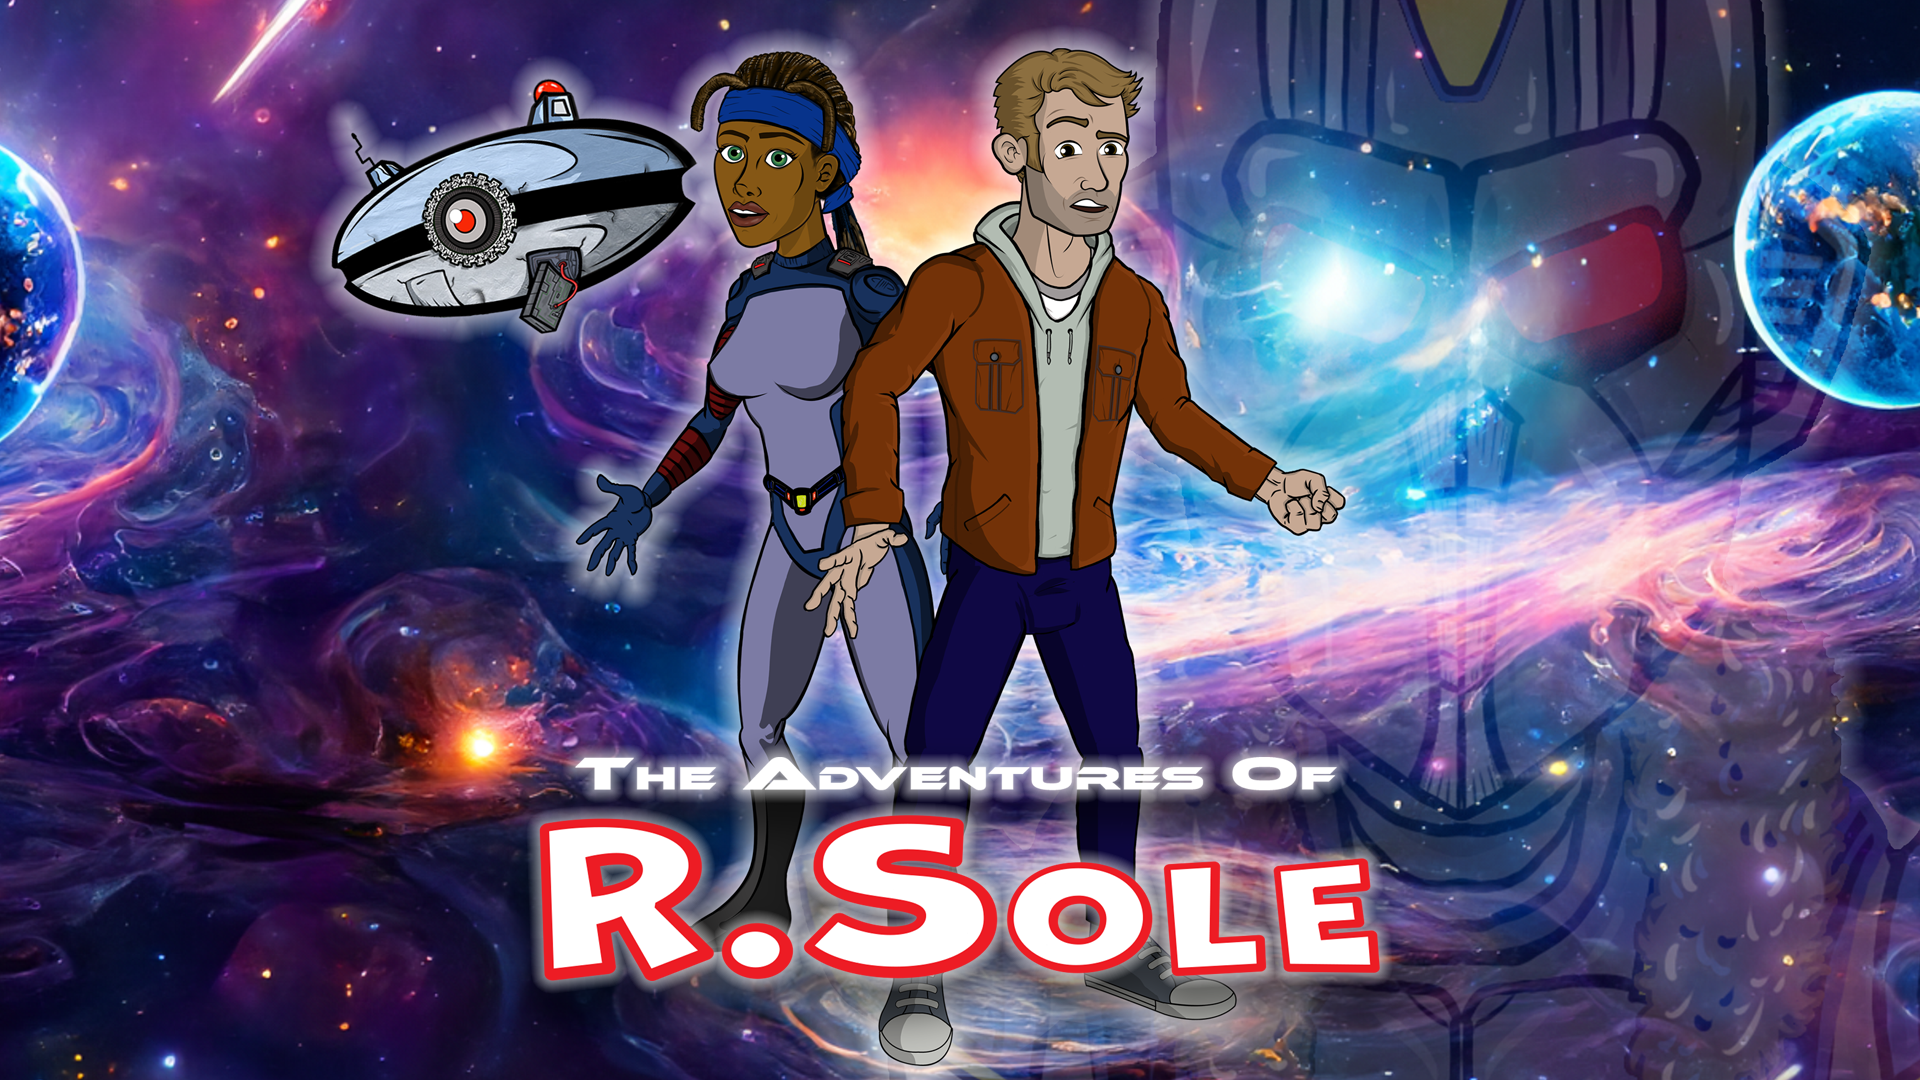 The Adventures of R Sole Banner